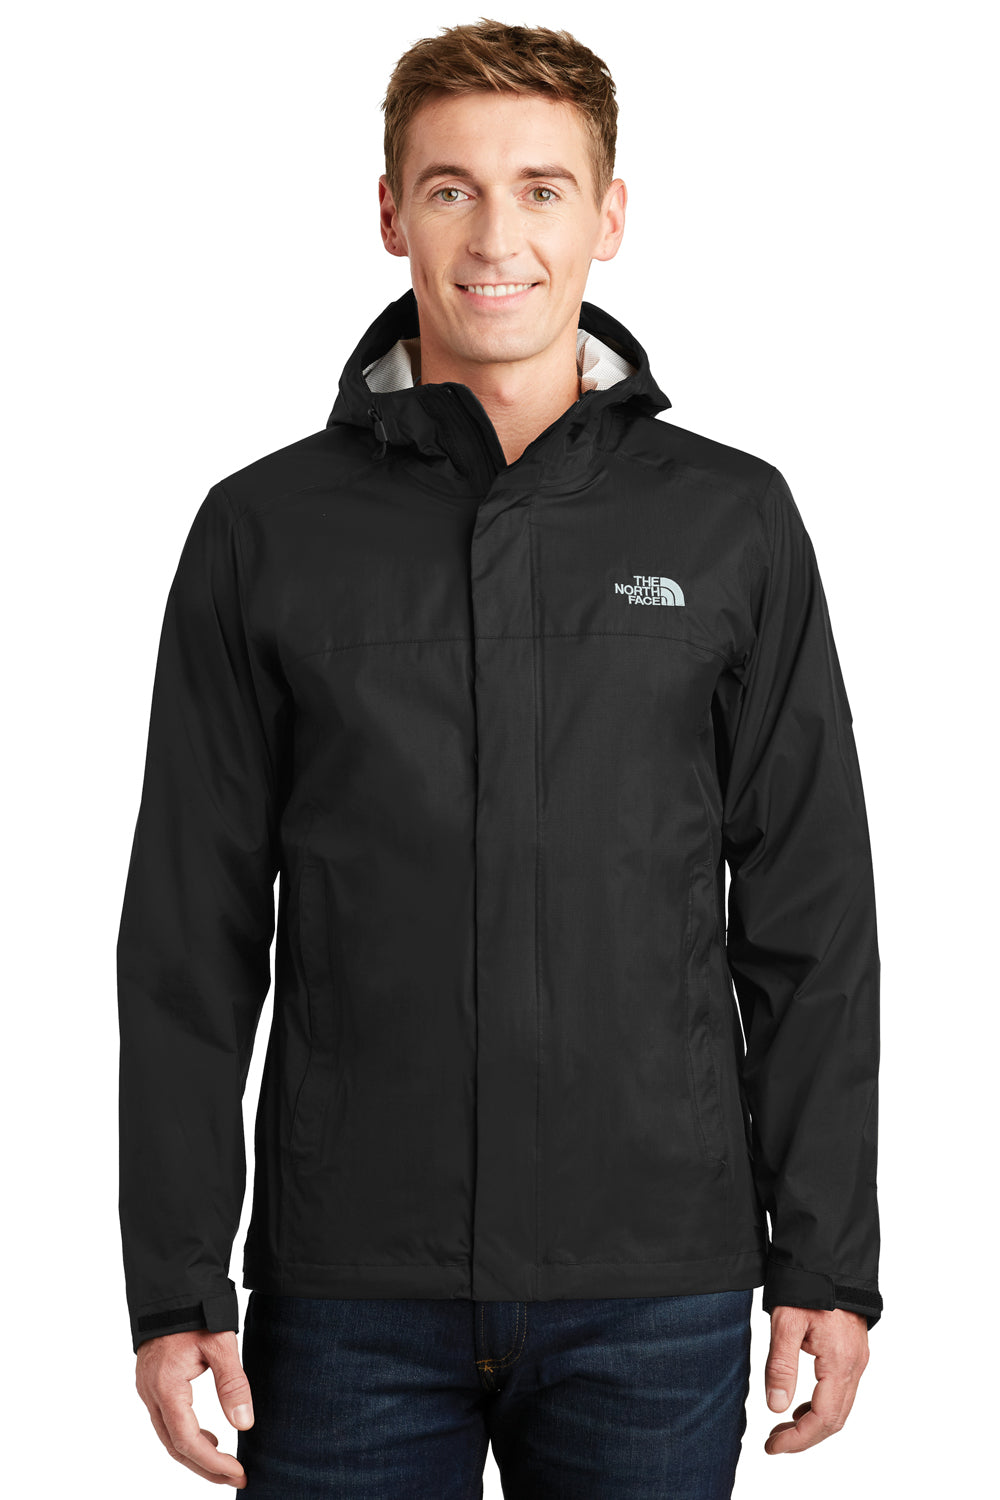 The North Face NF0A3LH4 Mens DryVent Waterproof Full Zip Hooded Jacket Black Front